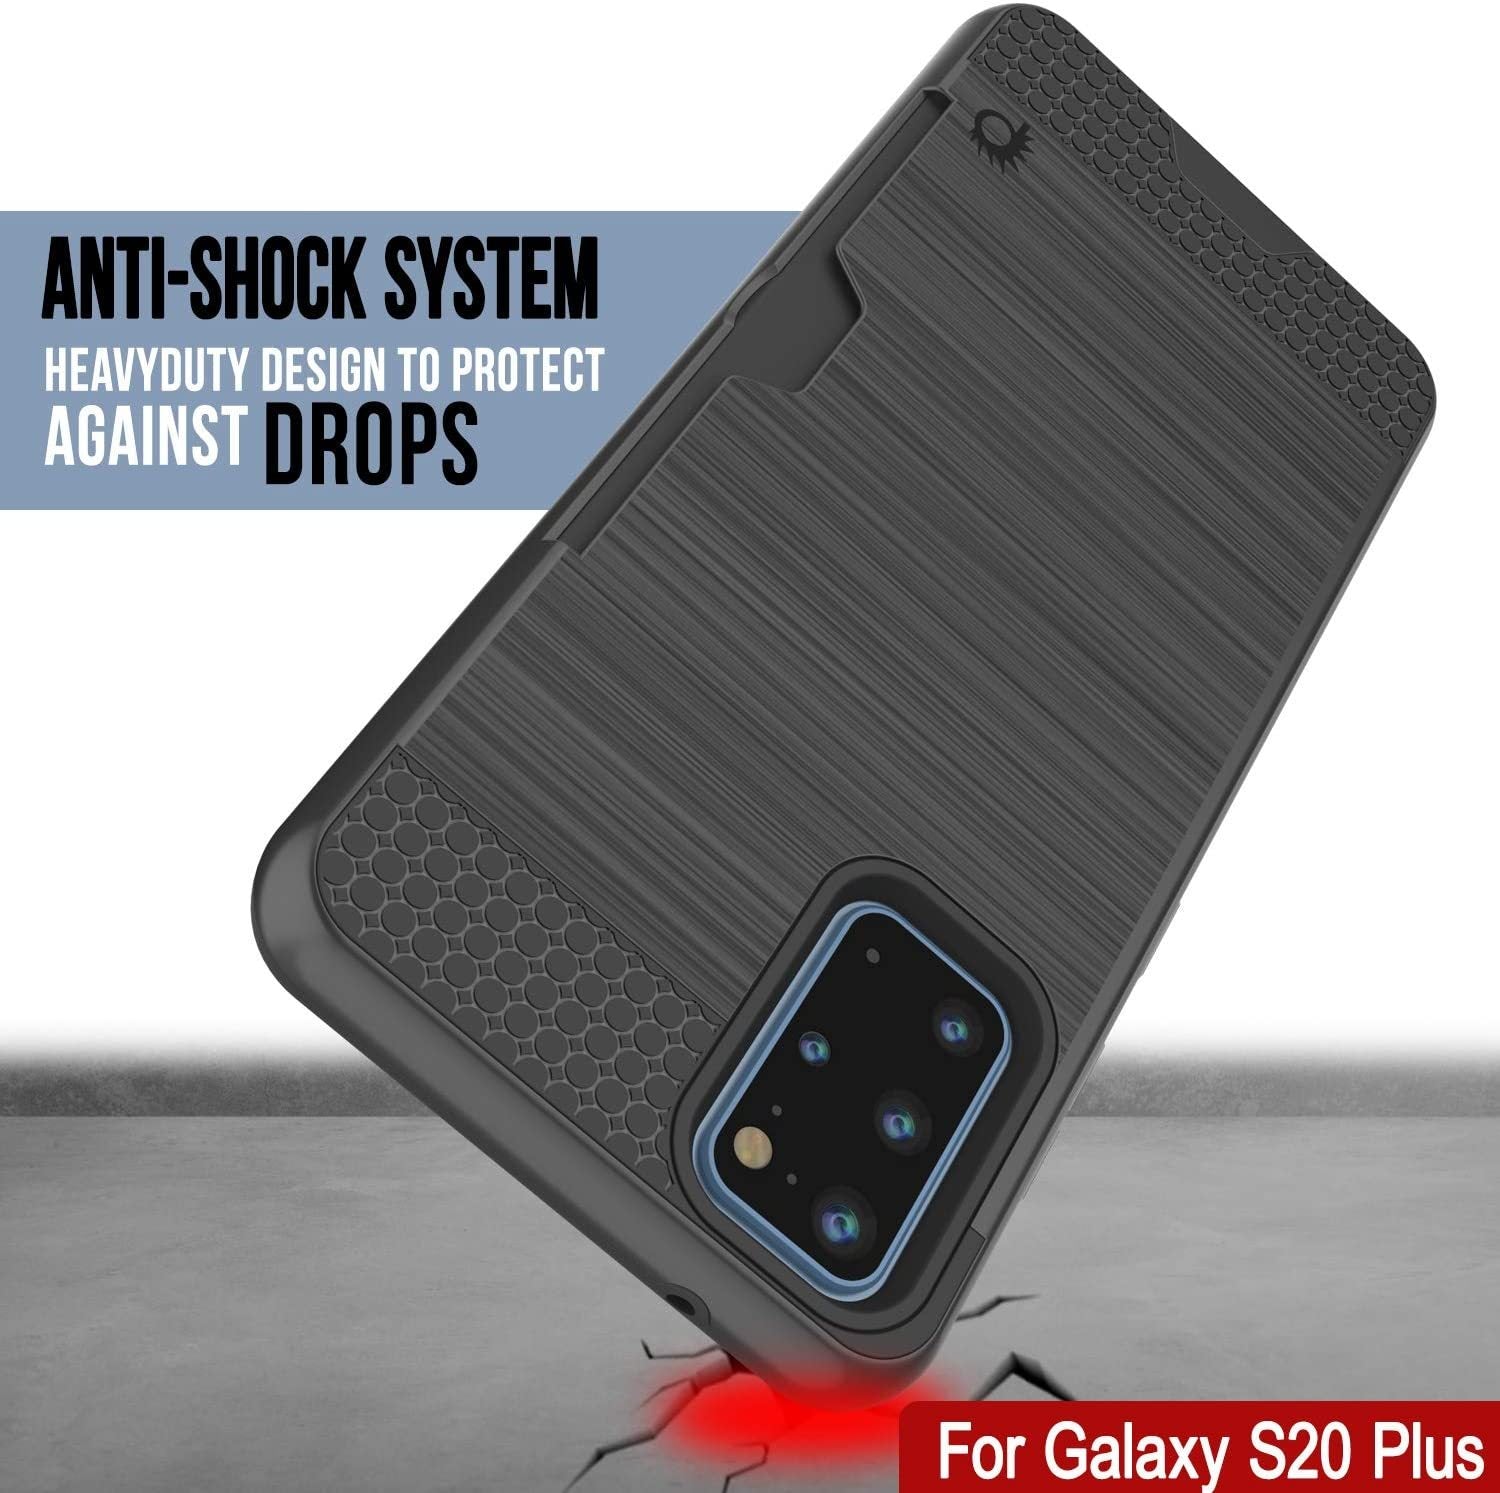 Galaxy S20+ Plus  Case, PUNKcase [SLOT Series] [Slim Fit] Dual-Layer Armor Cover w/Integrated Anti-Shock System, Credit Card Slot [Grey]